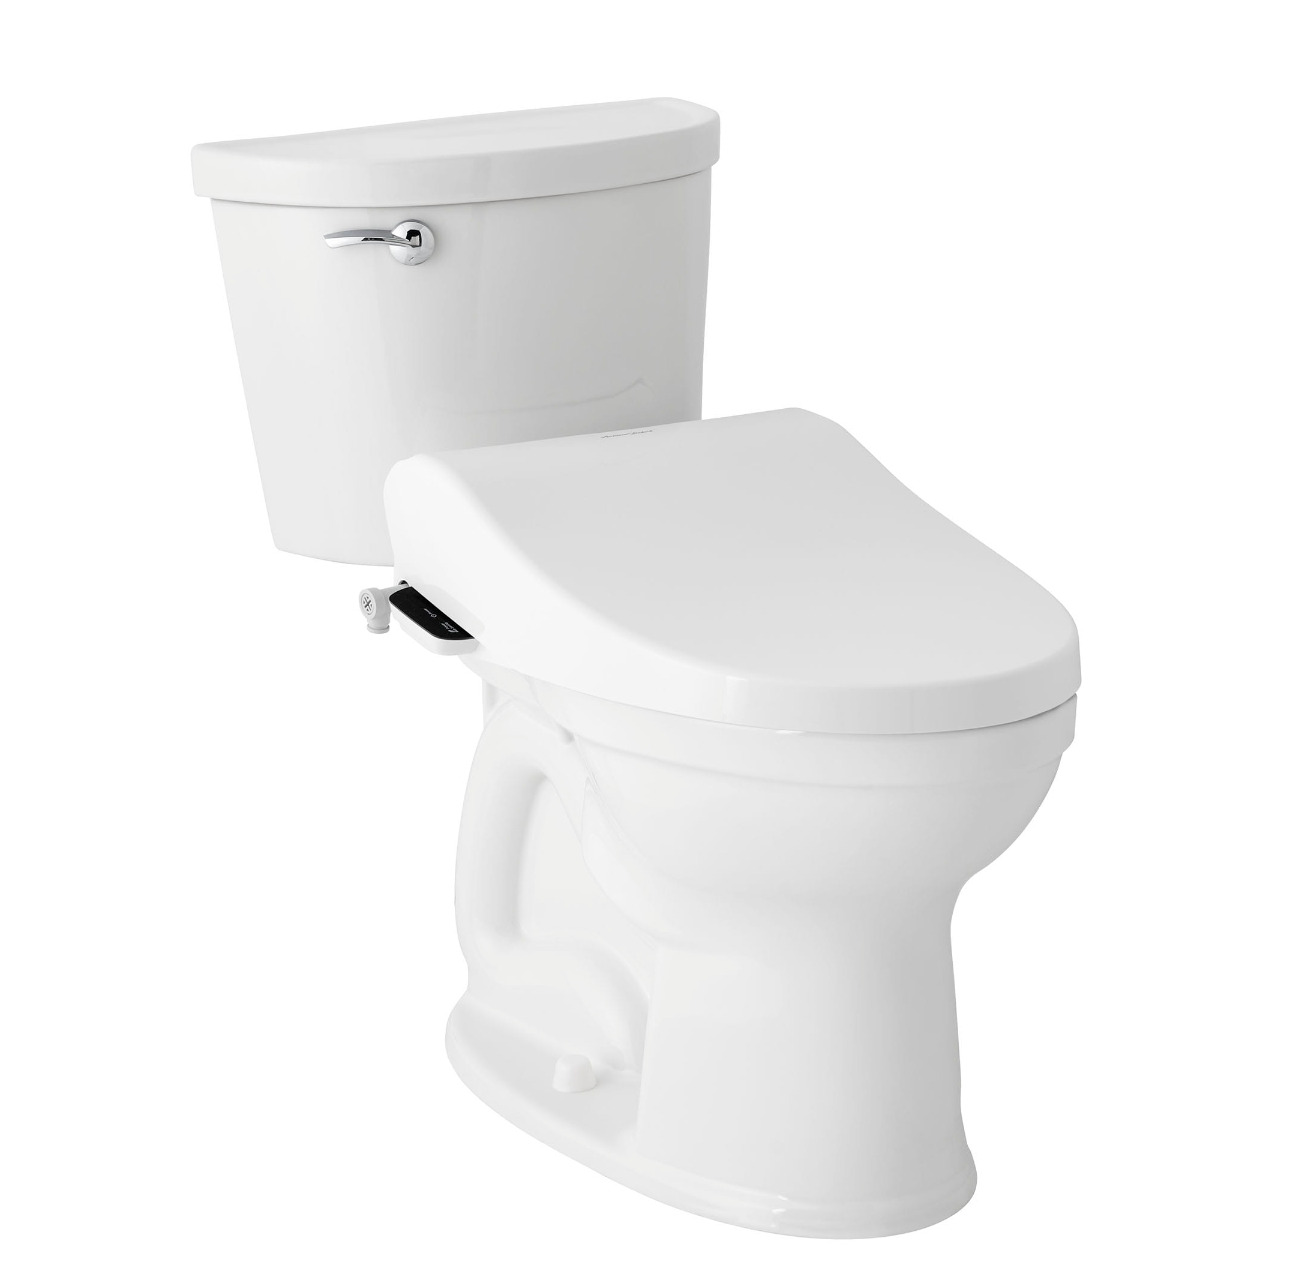 American Standard Advanced Clean 2.5 Electric SpaLet Bidet Seat With Remote Operation - Elongated